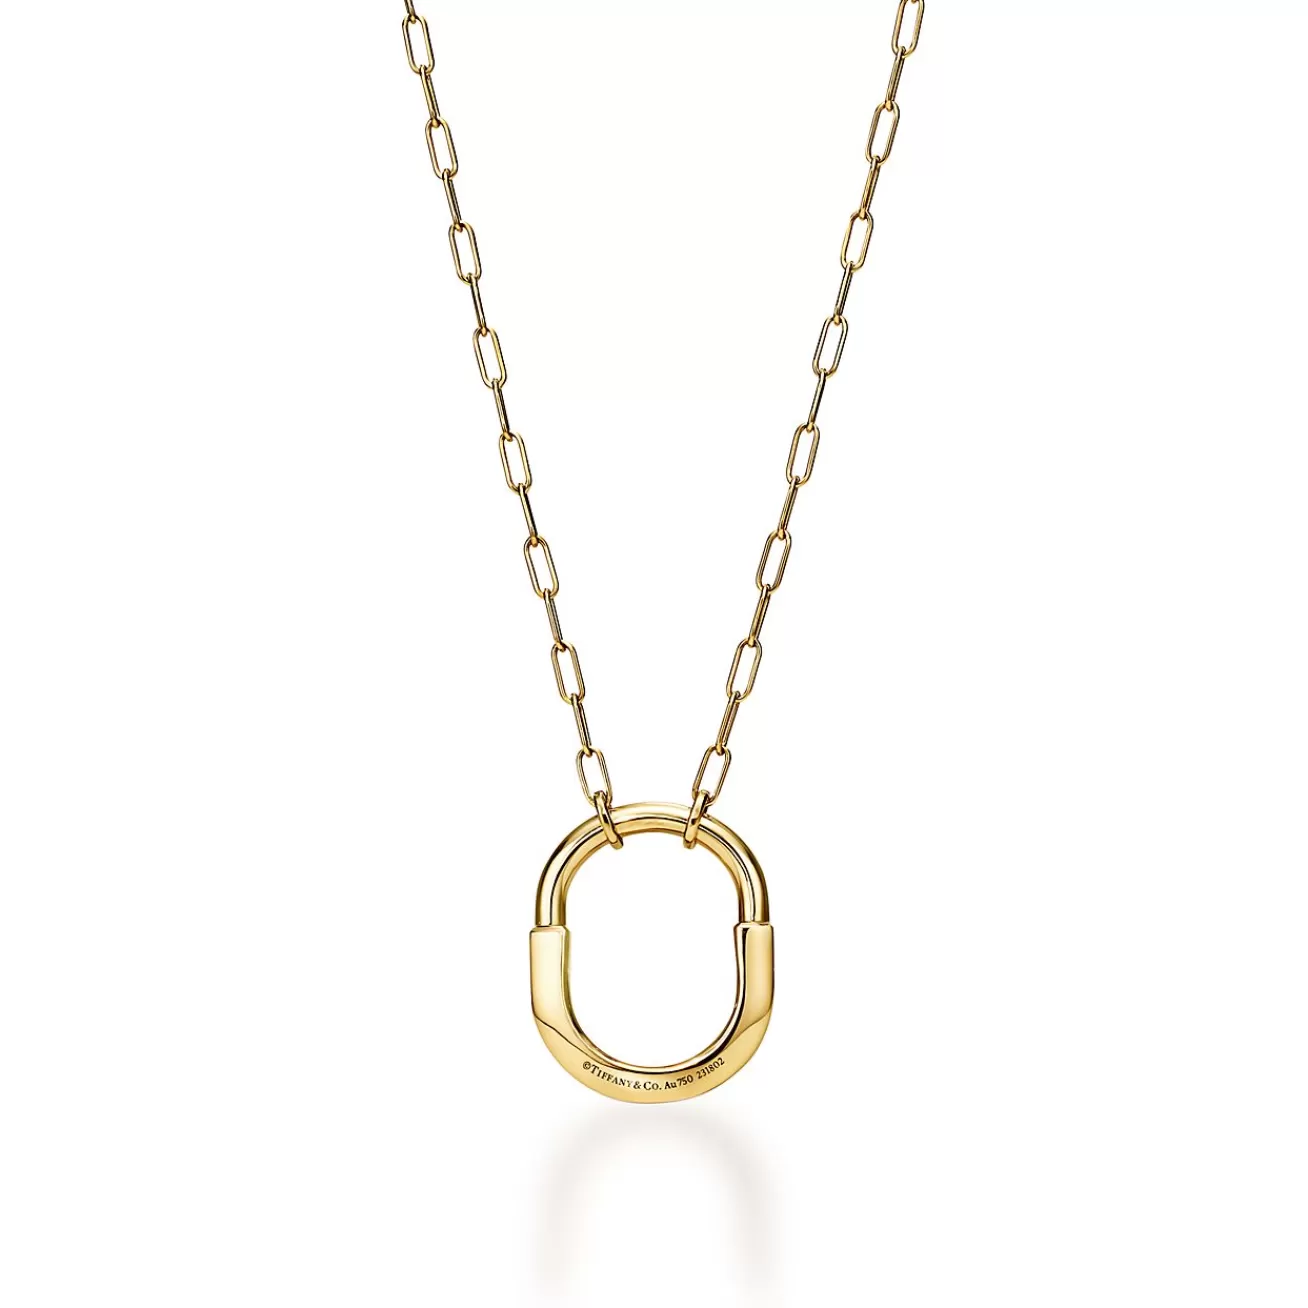 Tiffany & Co. Tiffany Lock Pendant in Yellow Gold, Medium | ^ Necklaces & Pendants | Gifts for Her